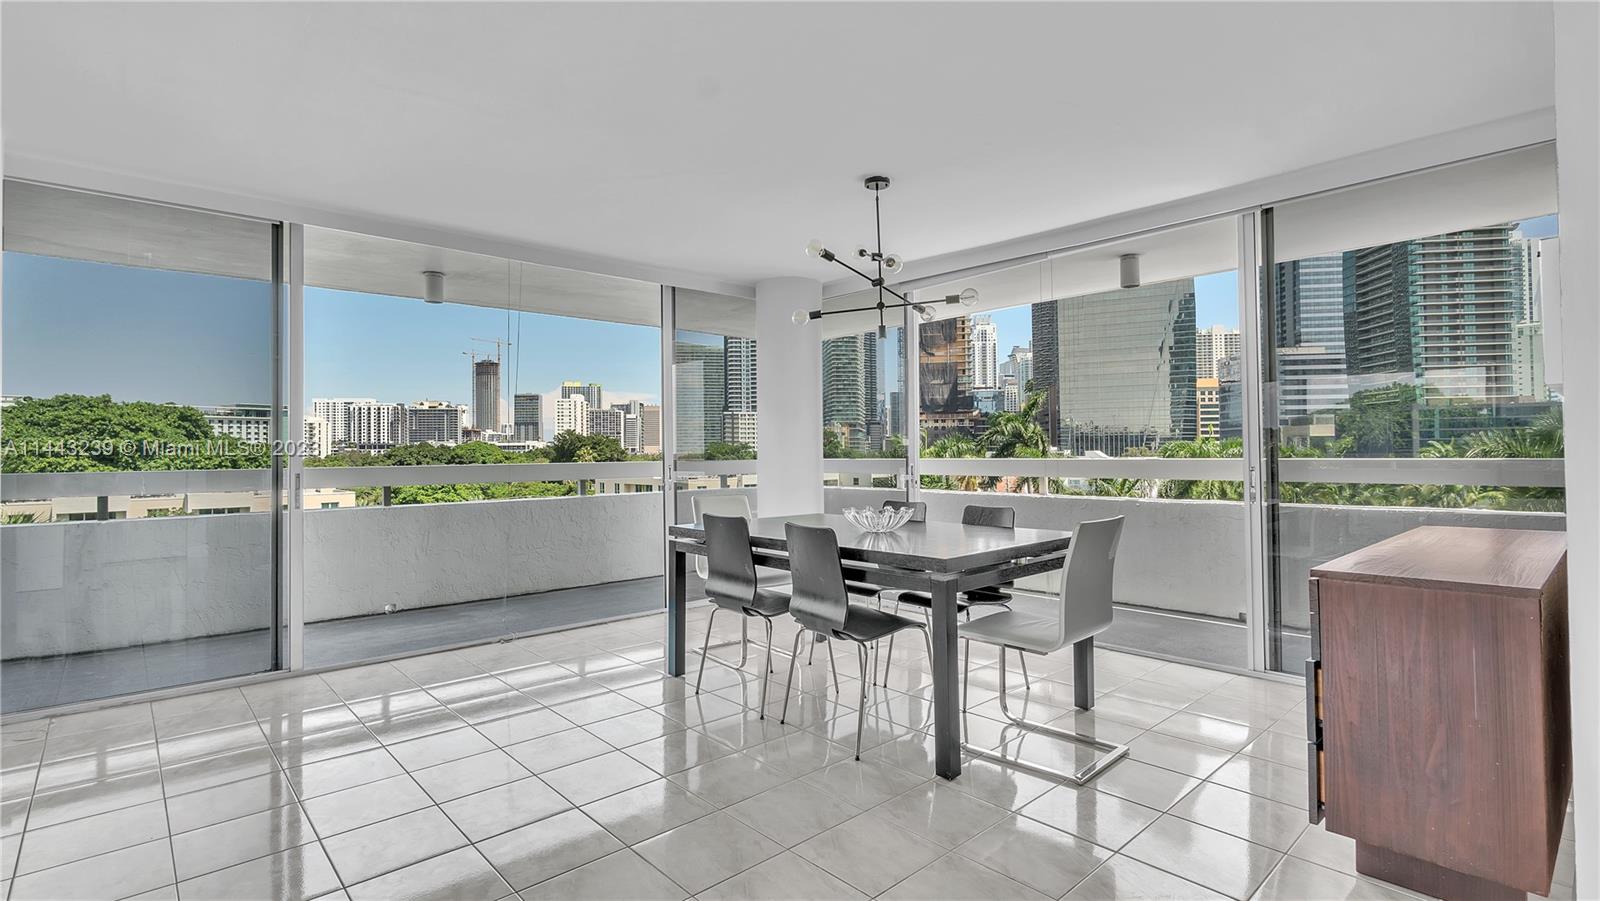 Imperial at Brickell image #13